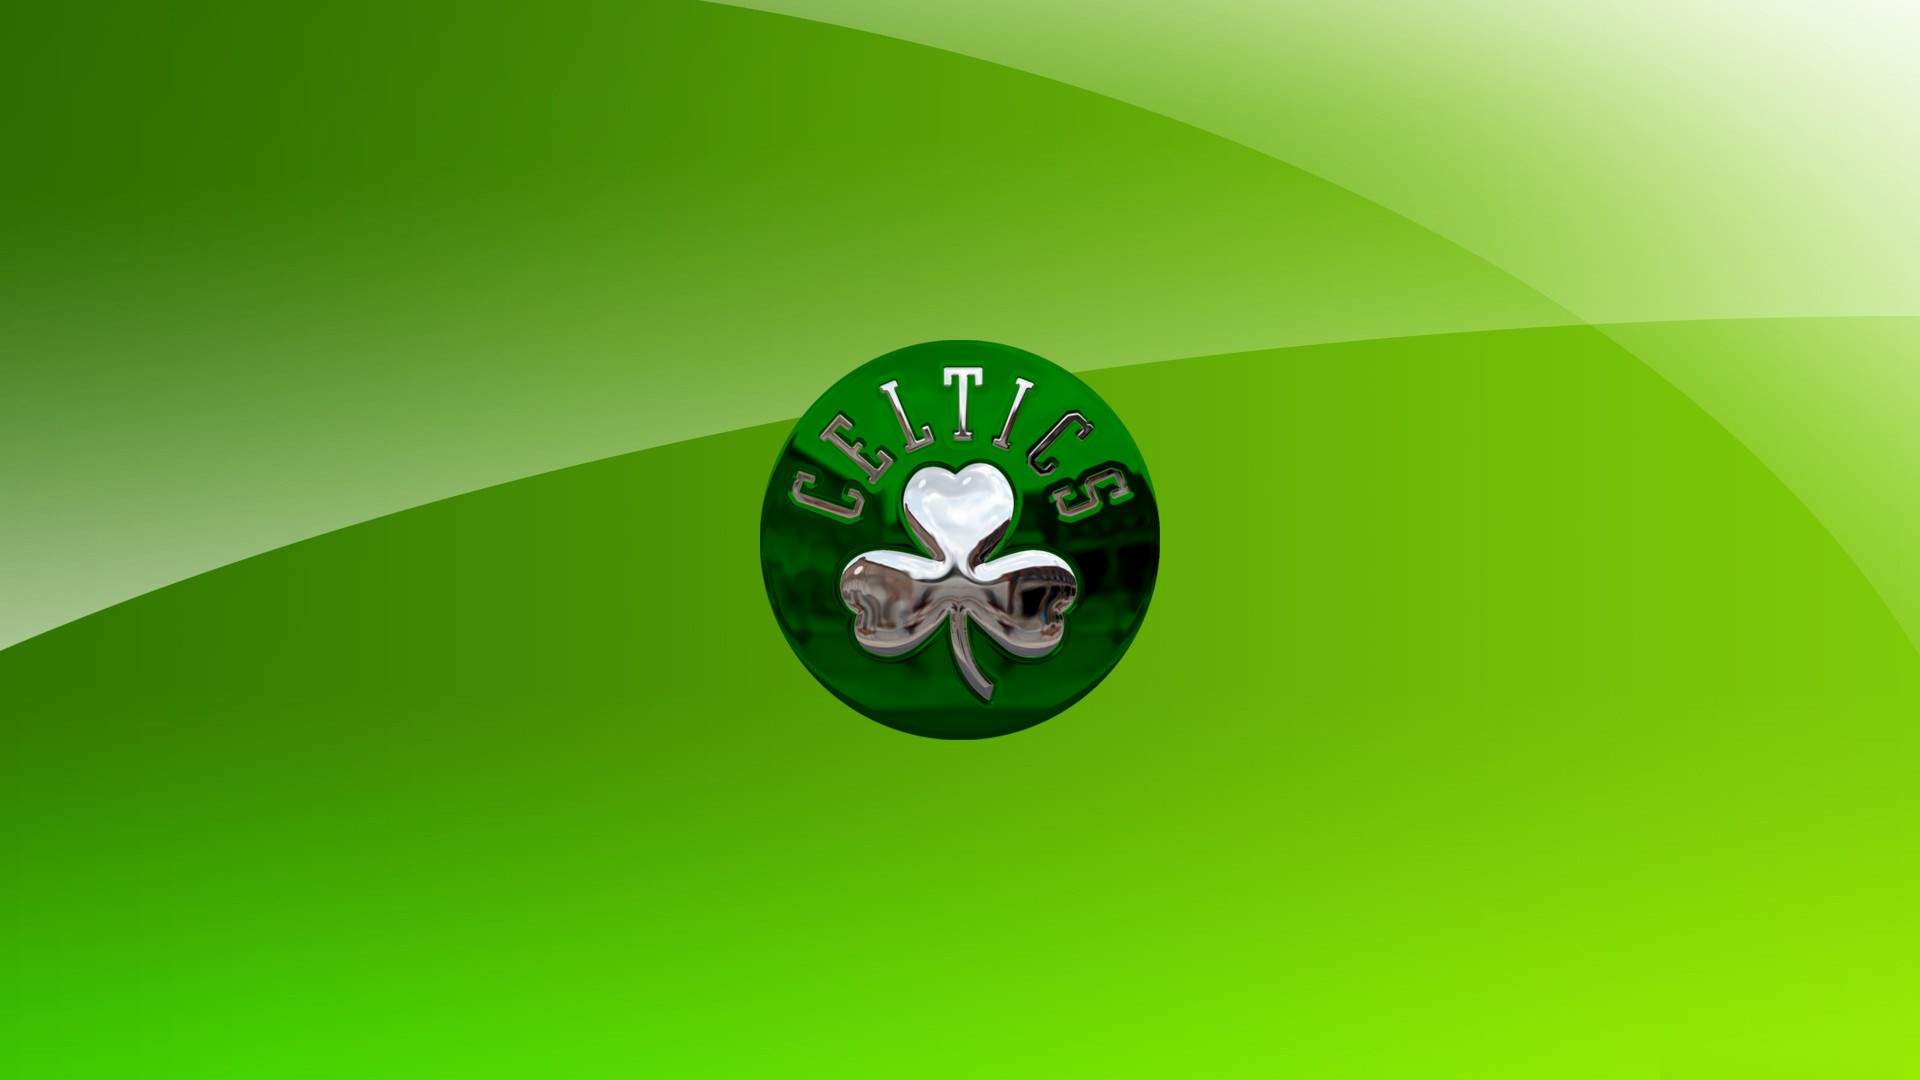 Wallpaper Desktop Boston Celtics HD with image dimensions 1920X1080 pixel. You can make this wallpaper for your Desktop Computer Backgrounds, Windows or Mac Screensavers, iPhone Lock screen, Tablet or Android and another Mobile Phone device